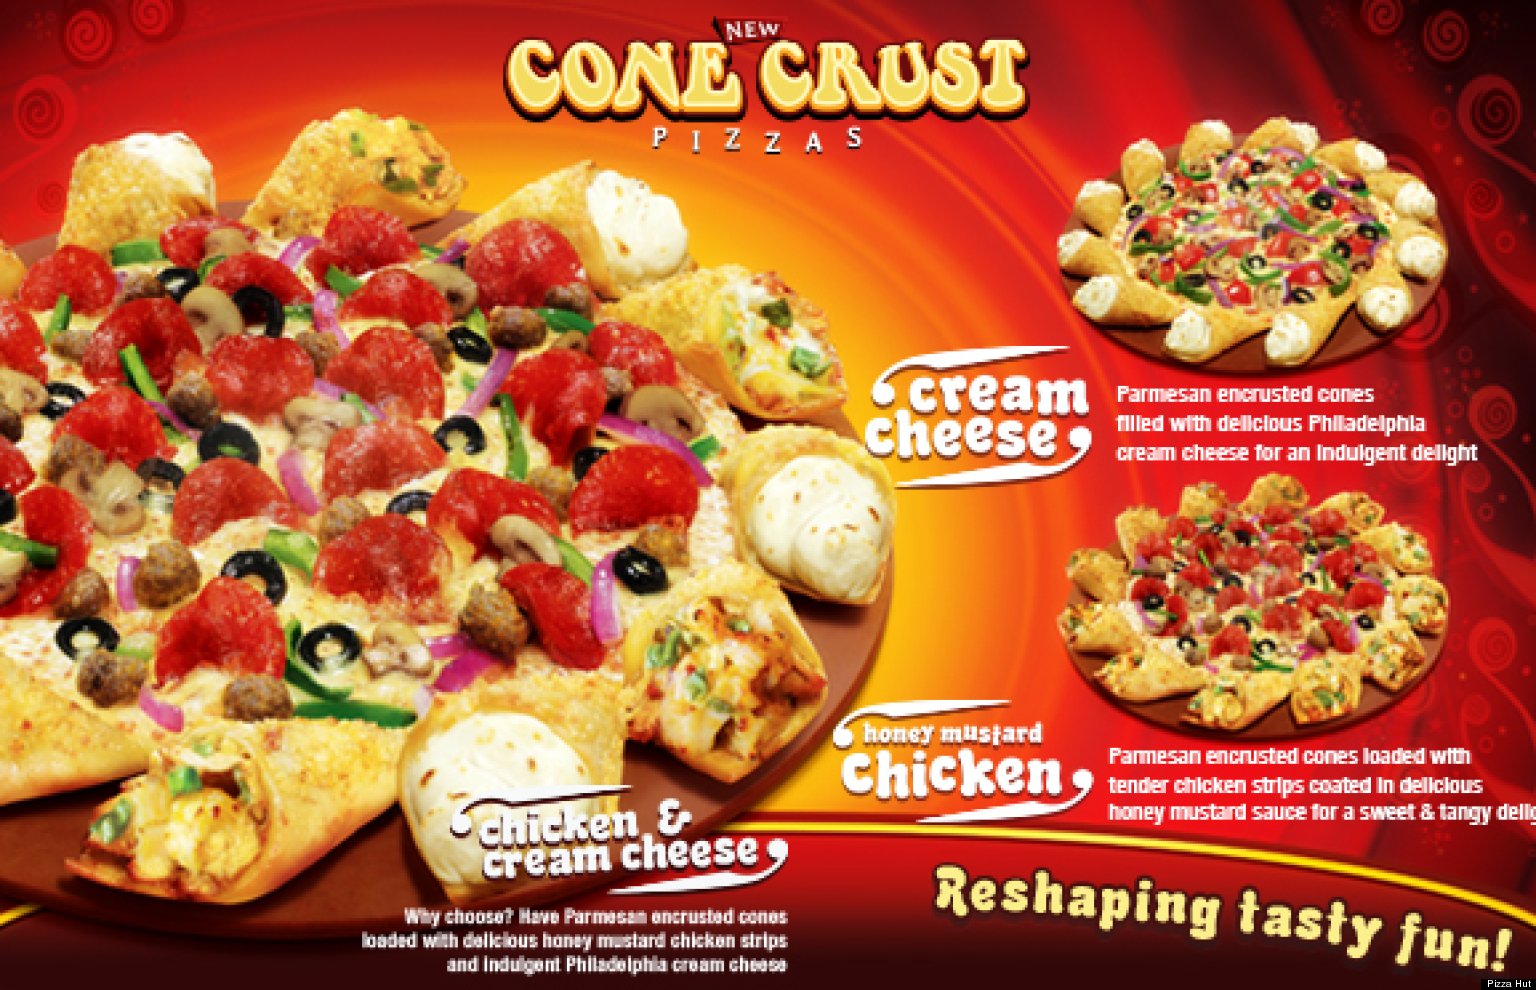 'Cone Crust Pizza' Is Pizza Hut's Latest GrossOut Creation In The